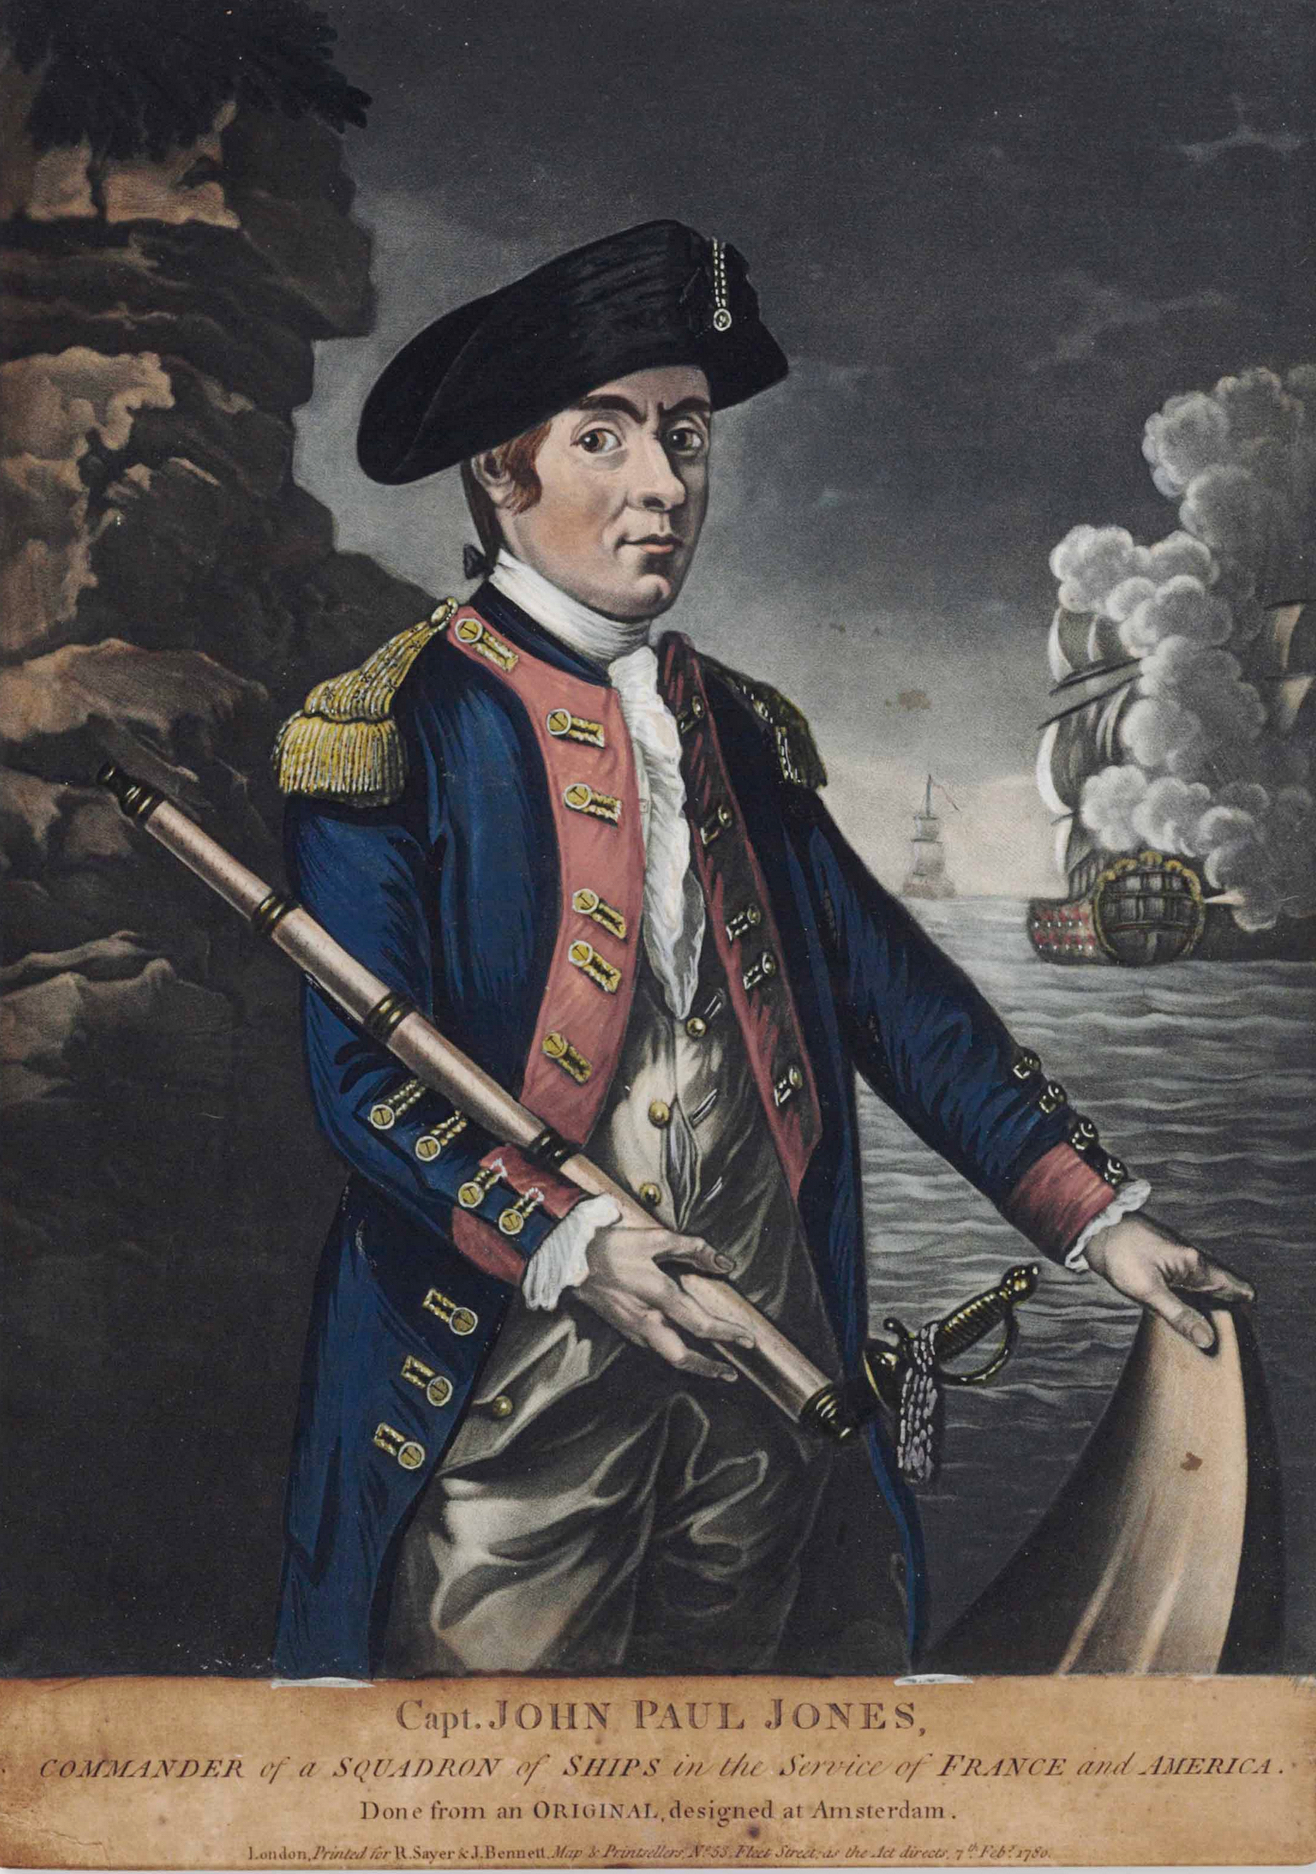 Capt. John Paul Jones. Commander of a Squadron of Ships in the Service of France and America. (London: Printed for R. Sayer and J. Bennett, 7 February 1780). Christie’s, Fine Printed Books and Manuscripts Including Americana, sale 14998, New York, December 5, 2017